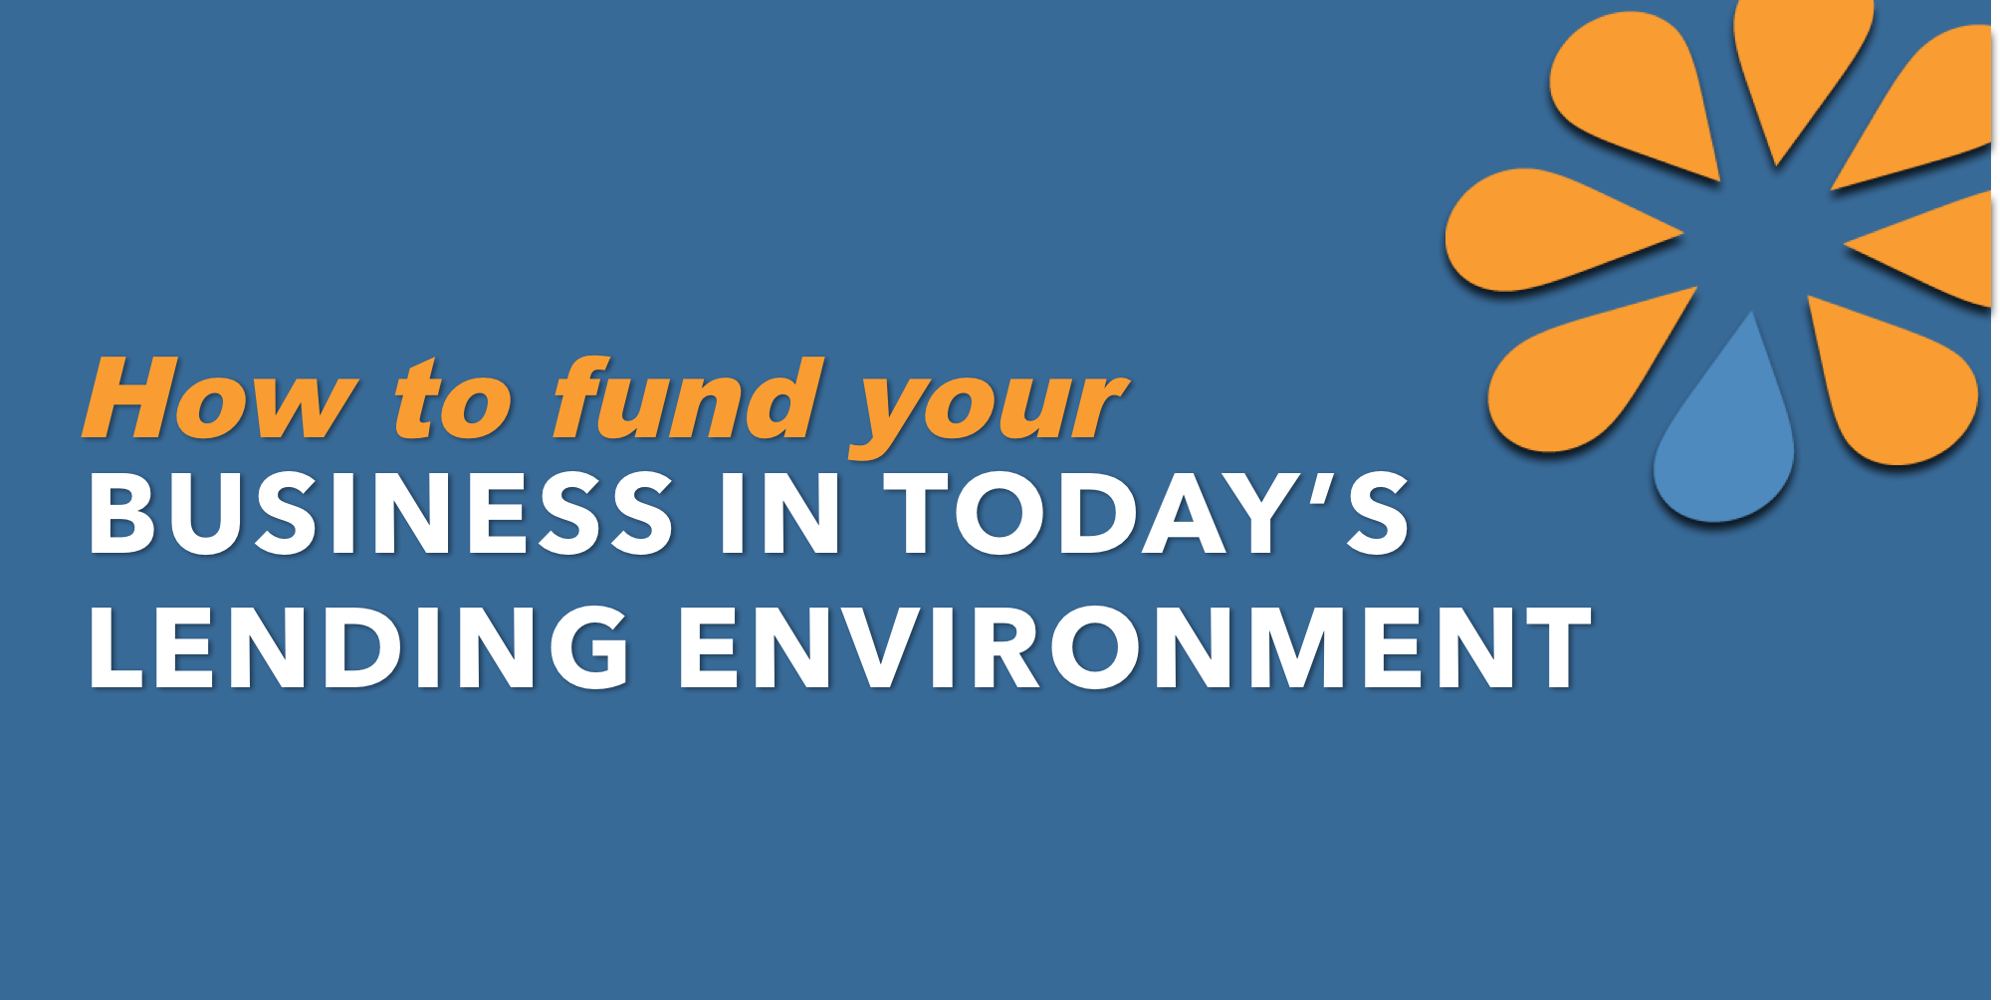 Learn How to Fund Your Business in Today's Lending Environment! promotional image